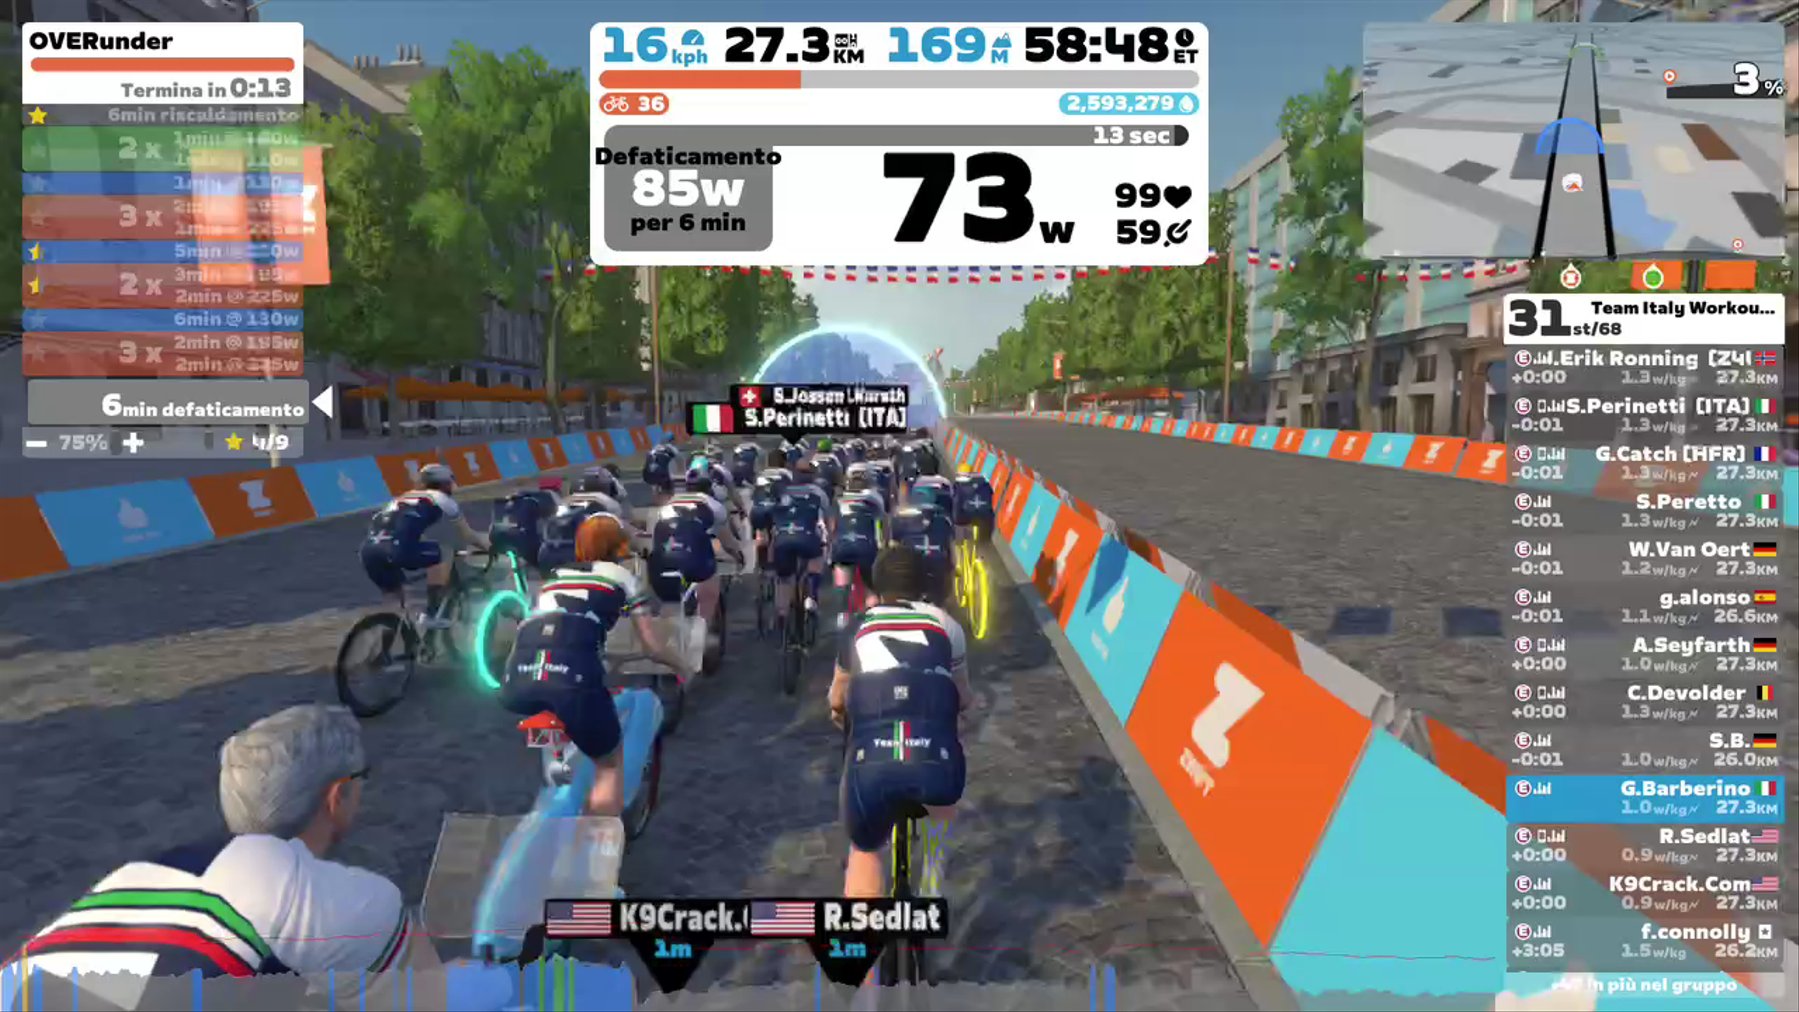 Zwift - Group Workout: Team Italy Workout Series by Manuel Ferrari (E) on Lutece Express in Paris